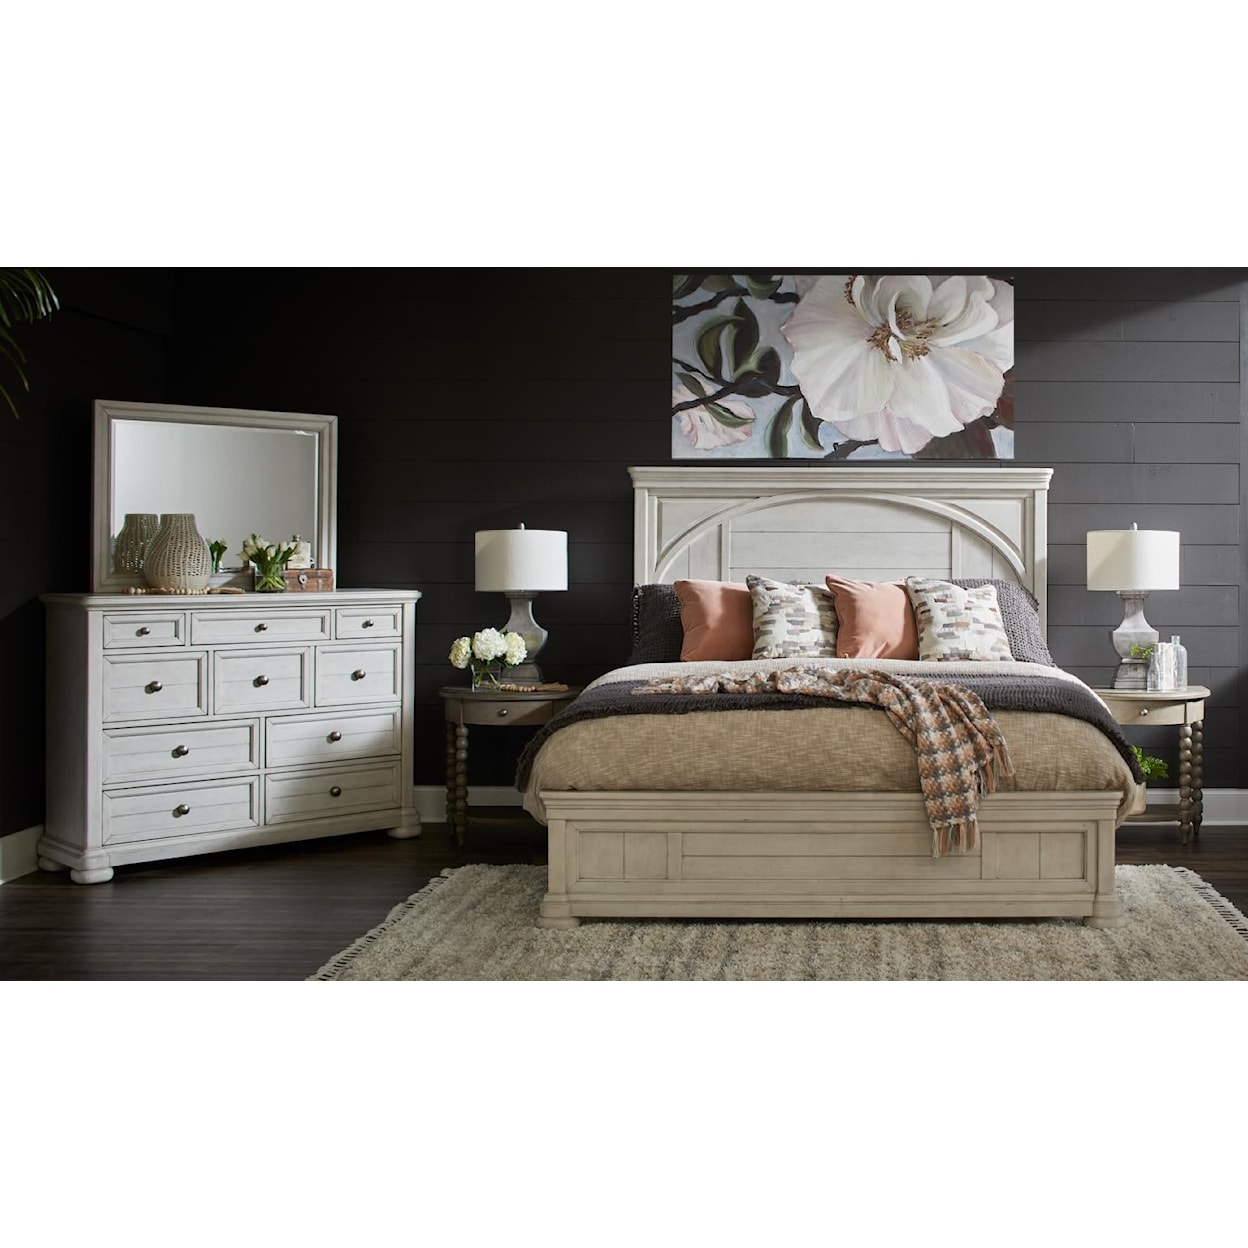 Trisha Yearwood Home Collection by Legacy Classic Nashville Demilune Night Table